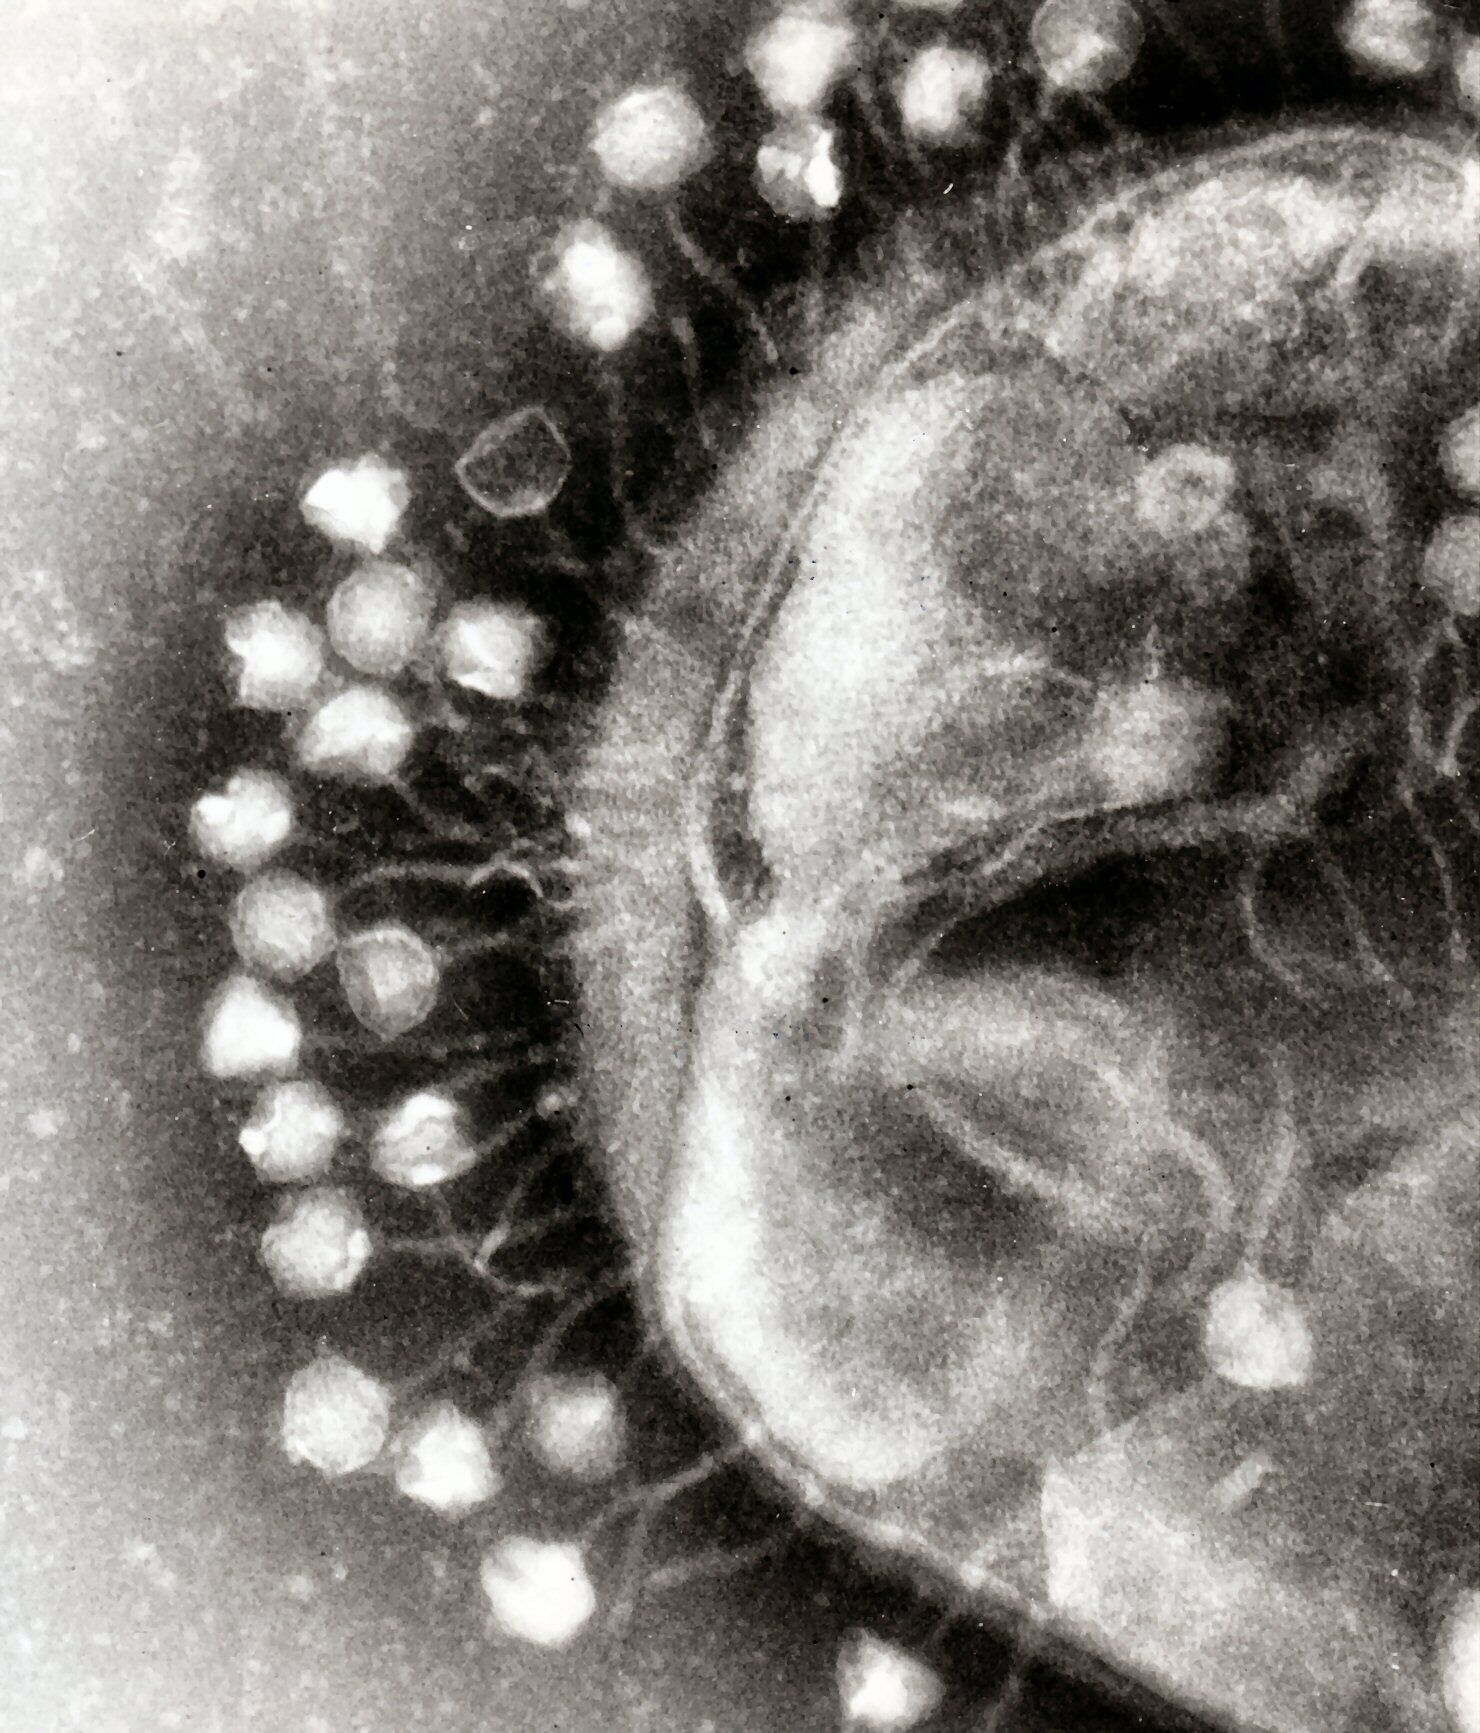 An electron micrograph of bacteriophages attached to a bacterial cell. These viruses are the size and shape of coliphage T1. Image: Wikipedia